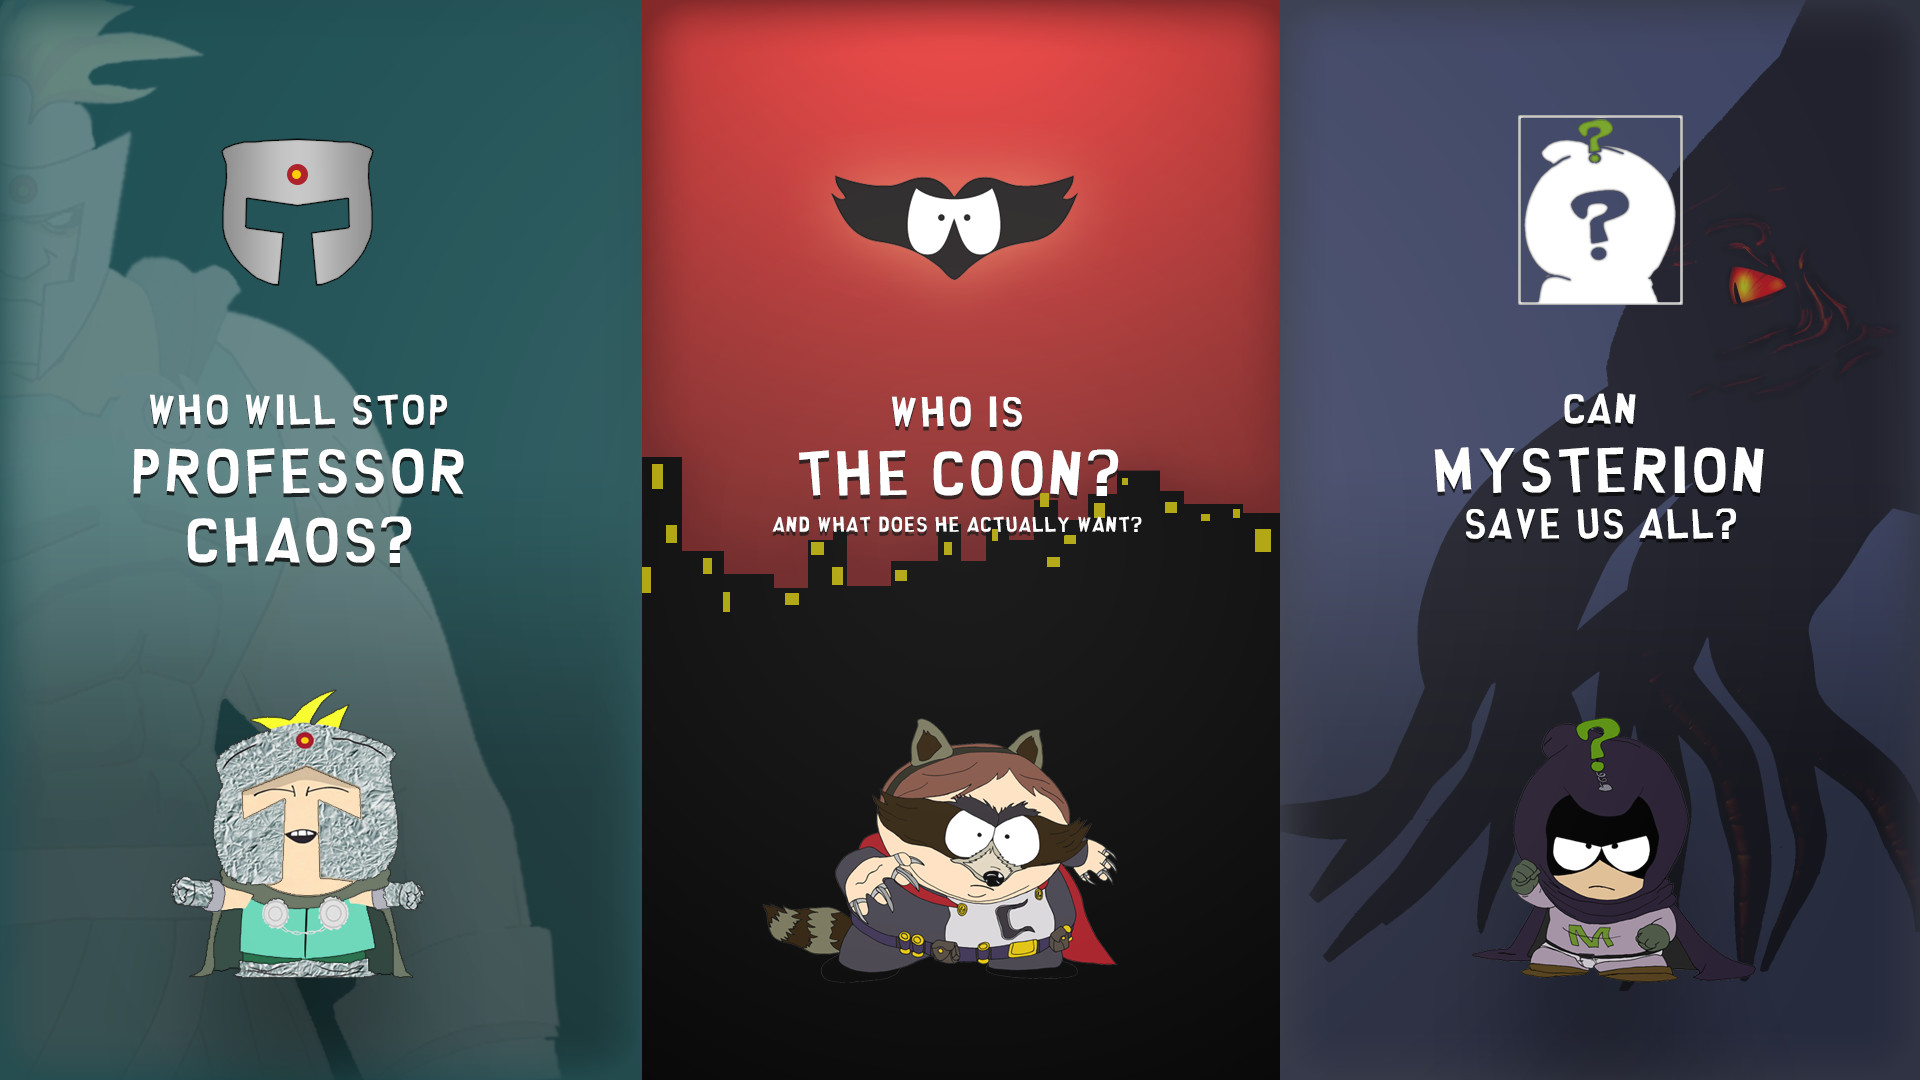 1920x1080 South Park Wallpapers - Chaos, Coon and Mysterion